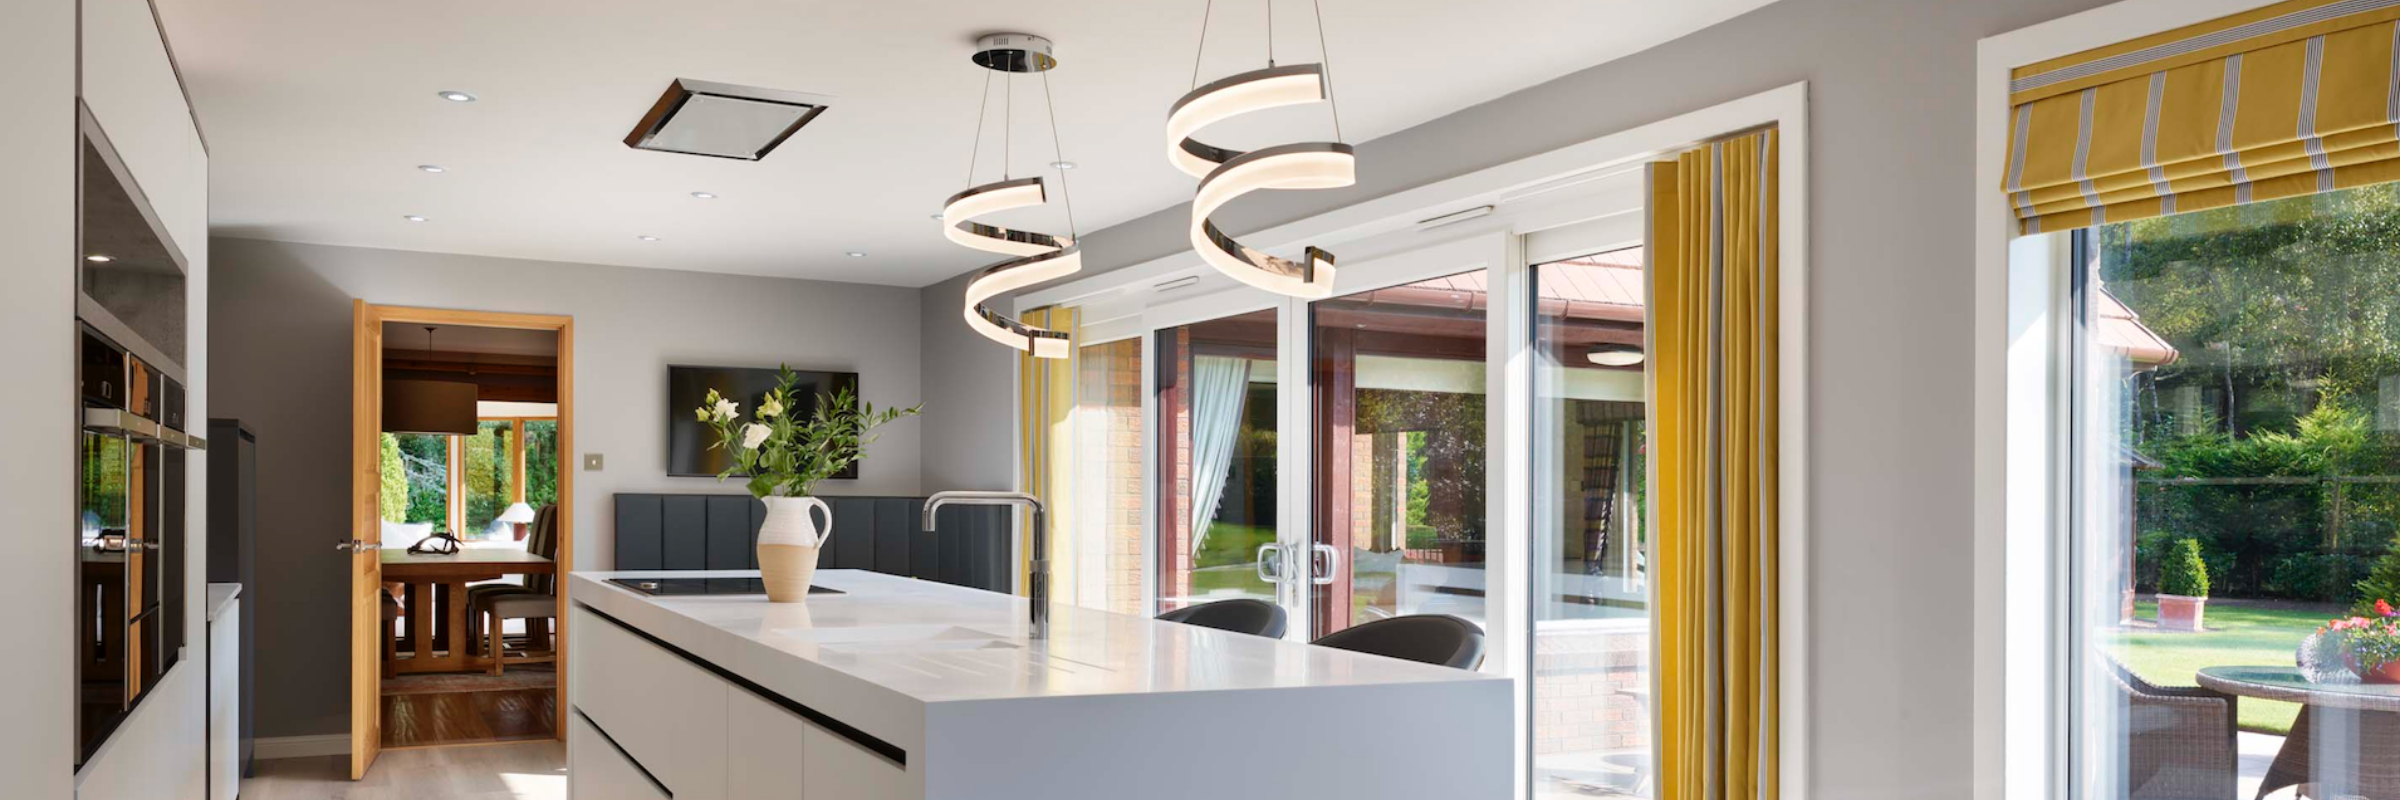 Kitchen Lighting Ideas For Your New Space Cambridge Kitchens